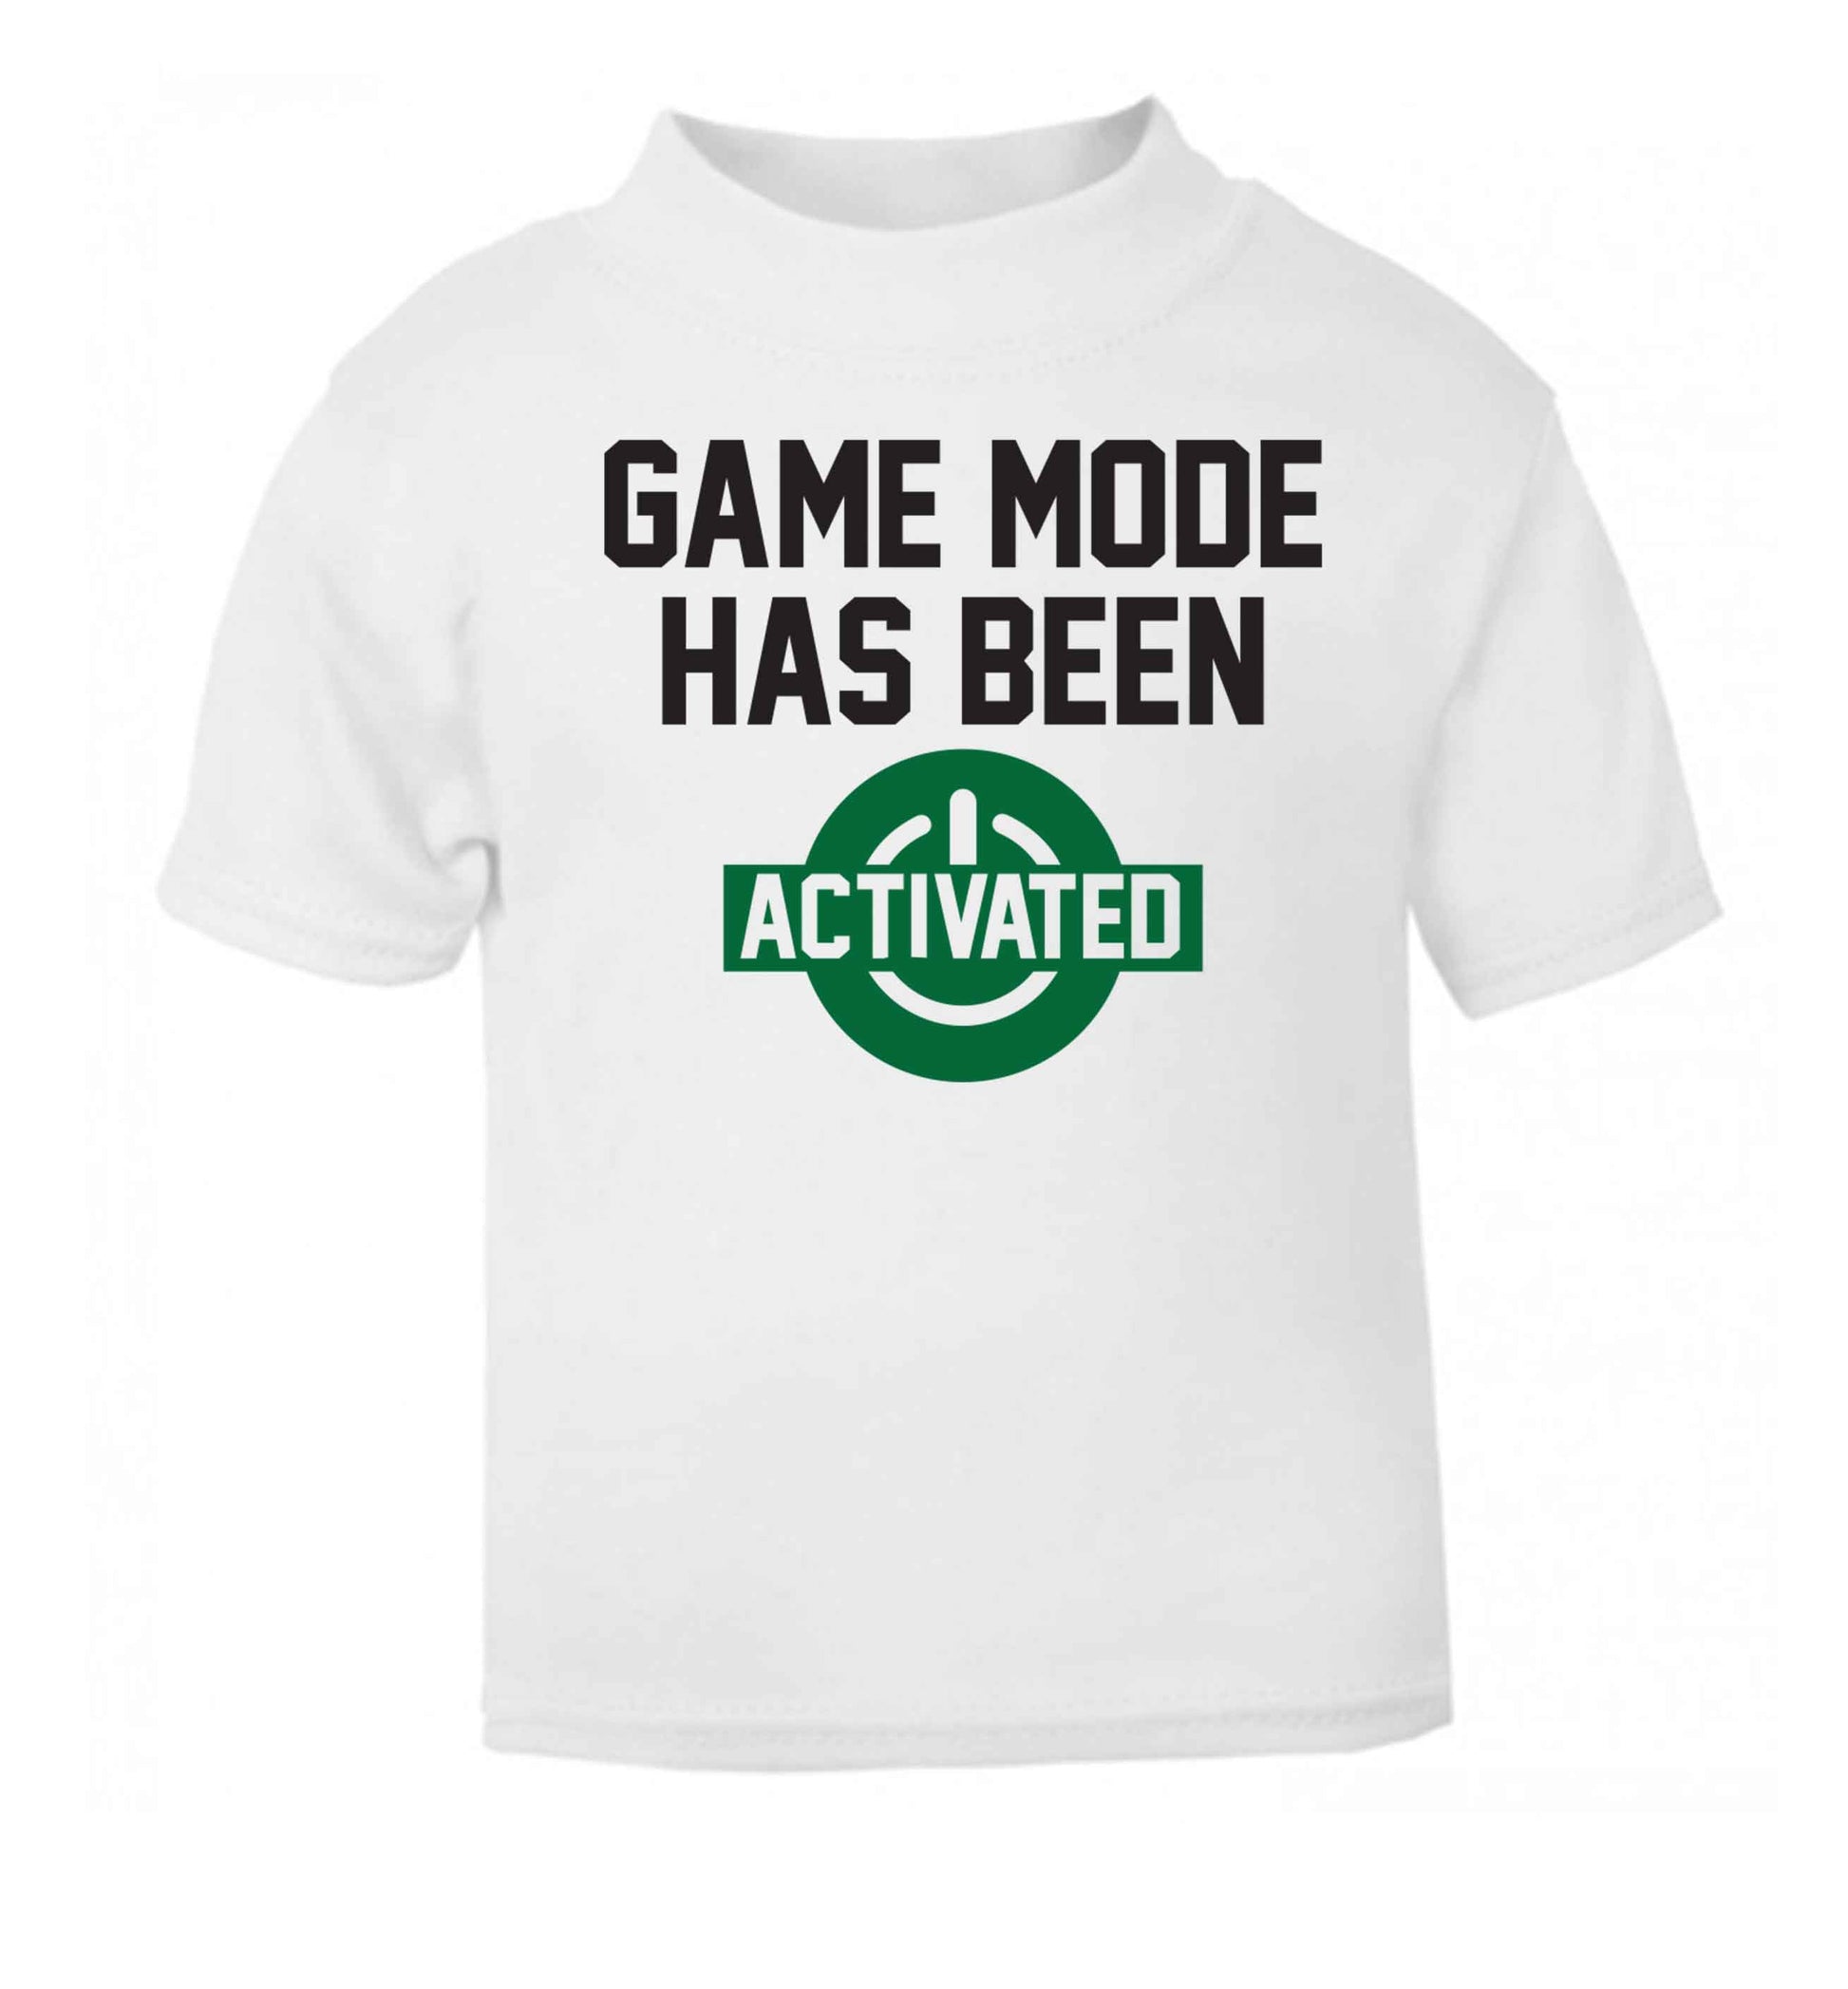 Game mode has been activated white baby toddler Tshirt 2 Years